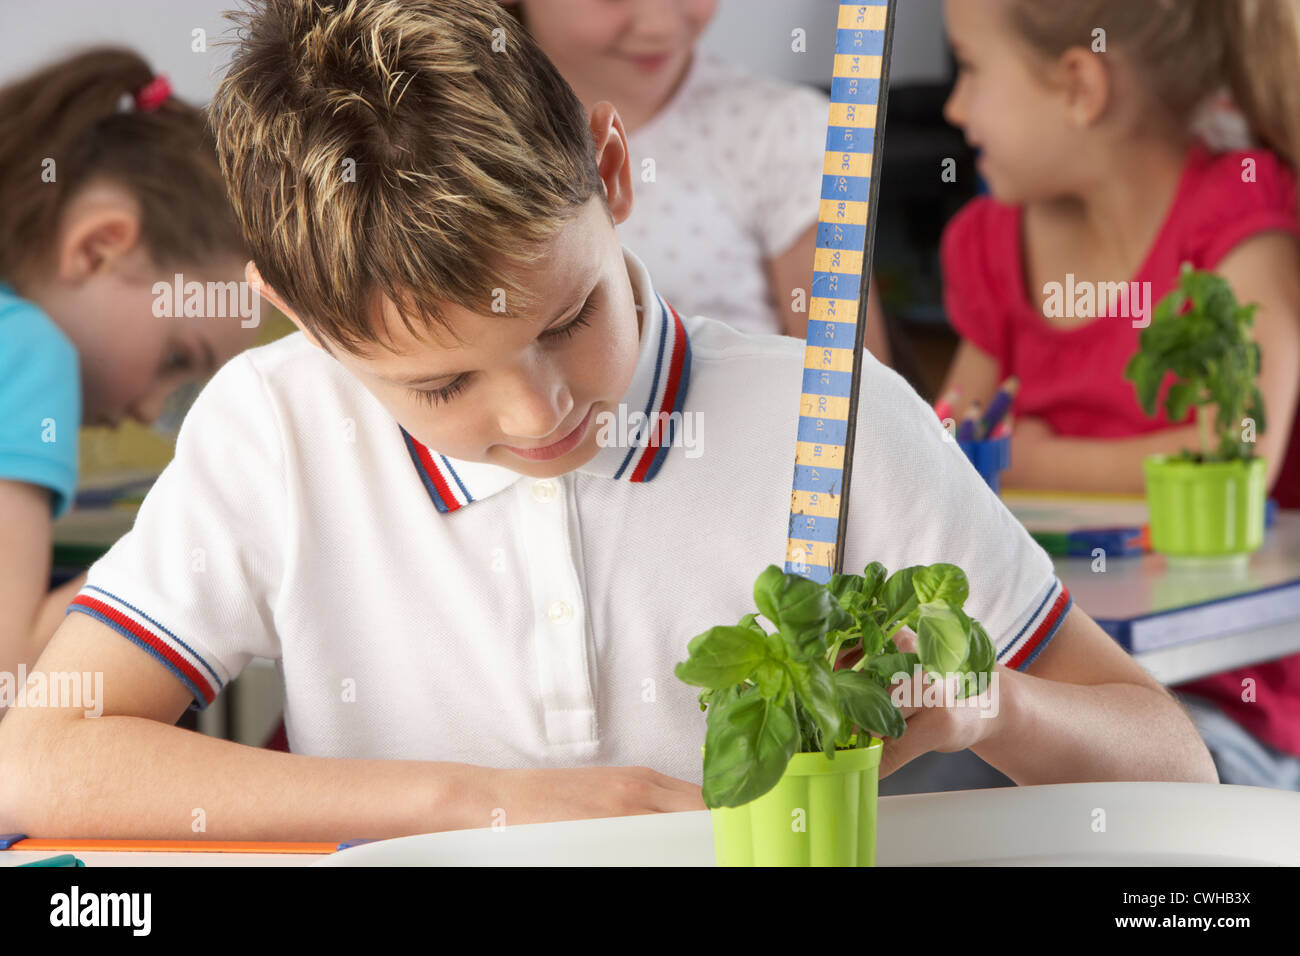 https://c8.alamy.com/comp/CWHB3X/boy-learning-about-plants-in-school-class-CWHB3X.jpg